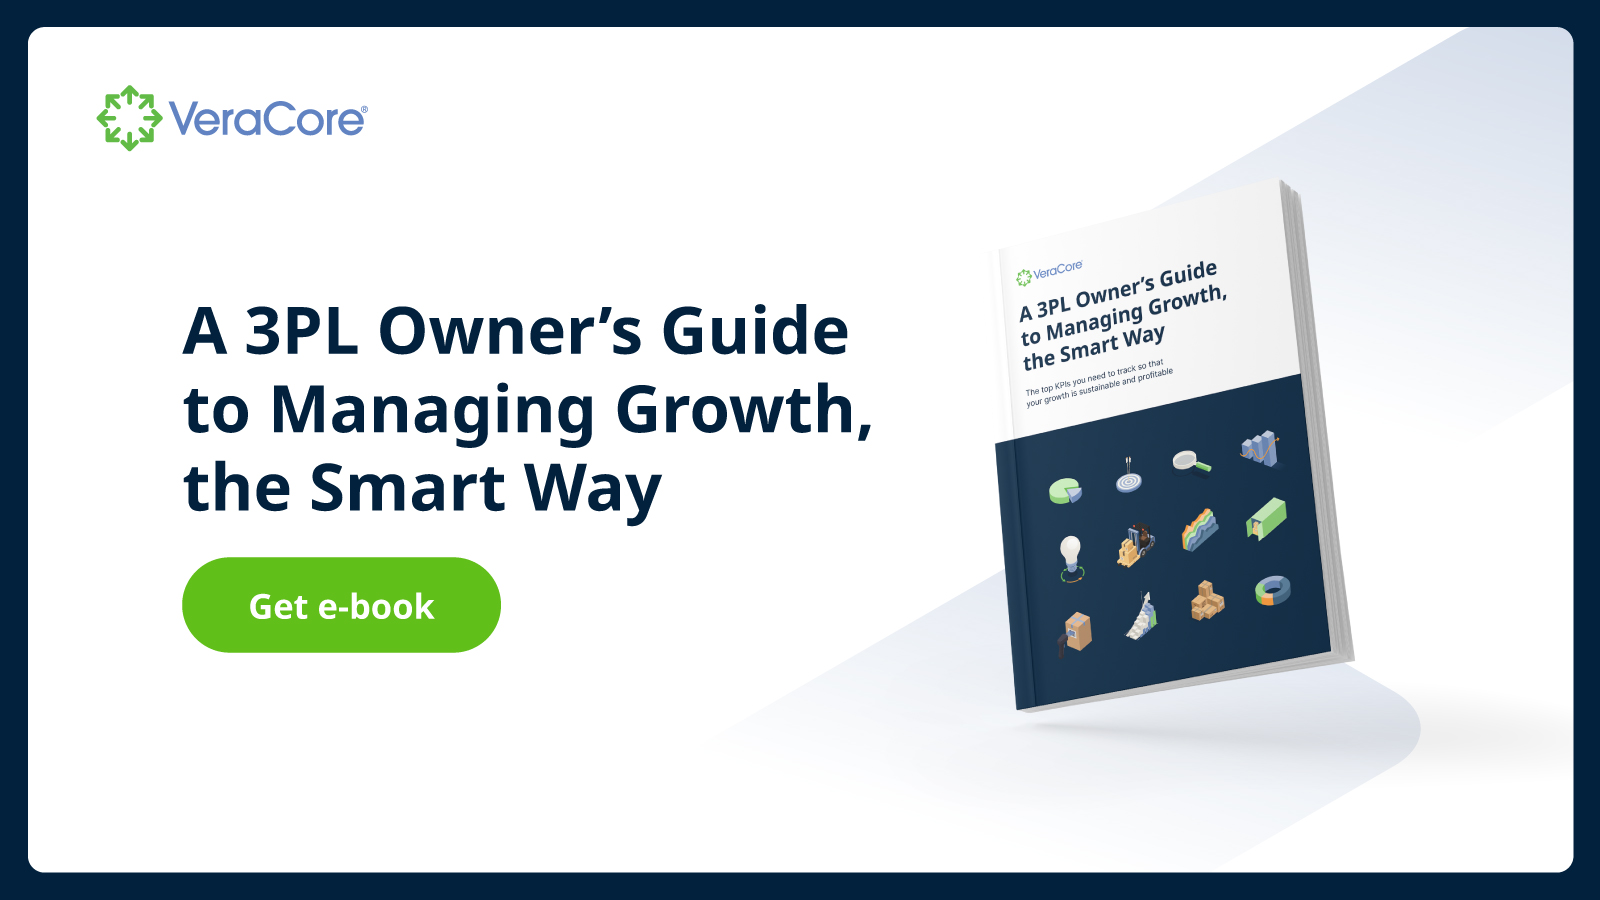 E-book: A 3PL Owner’s Guide to Managing Growth